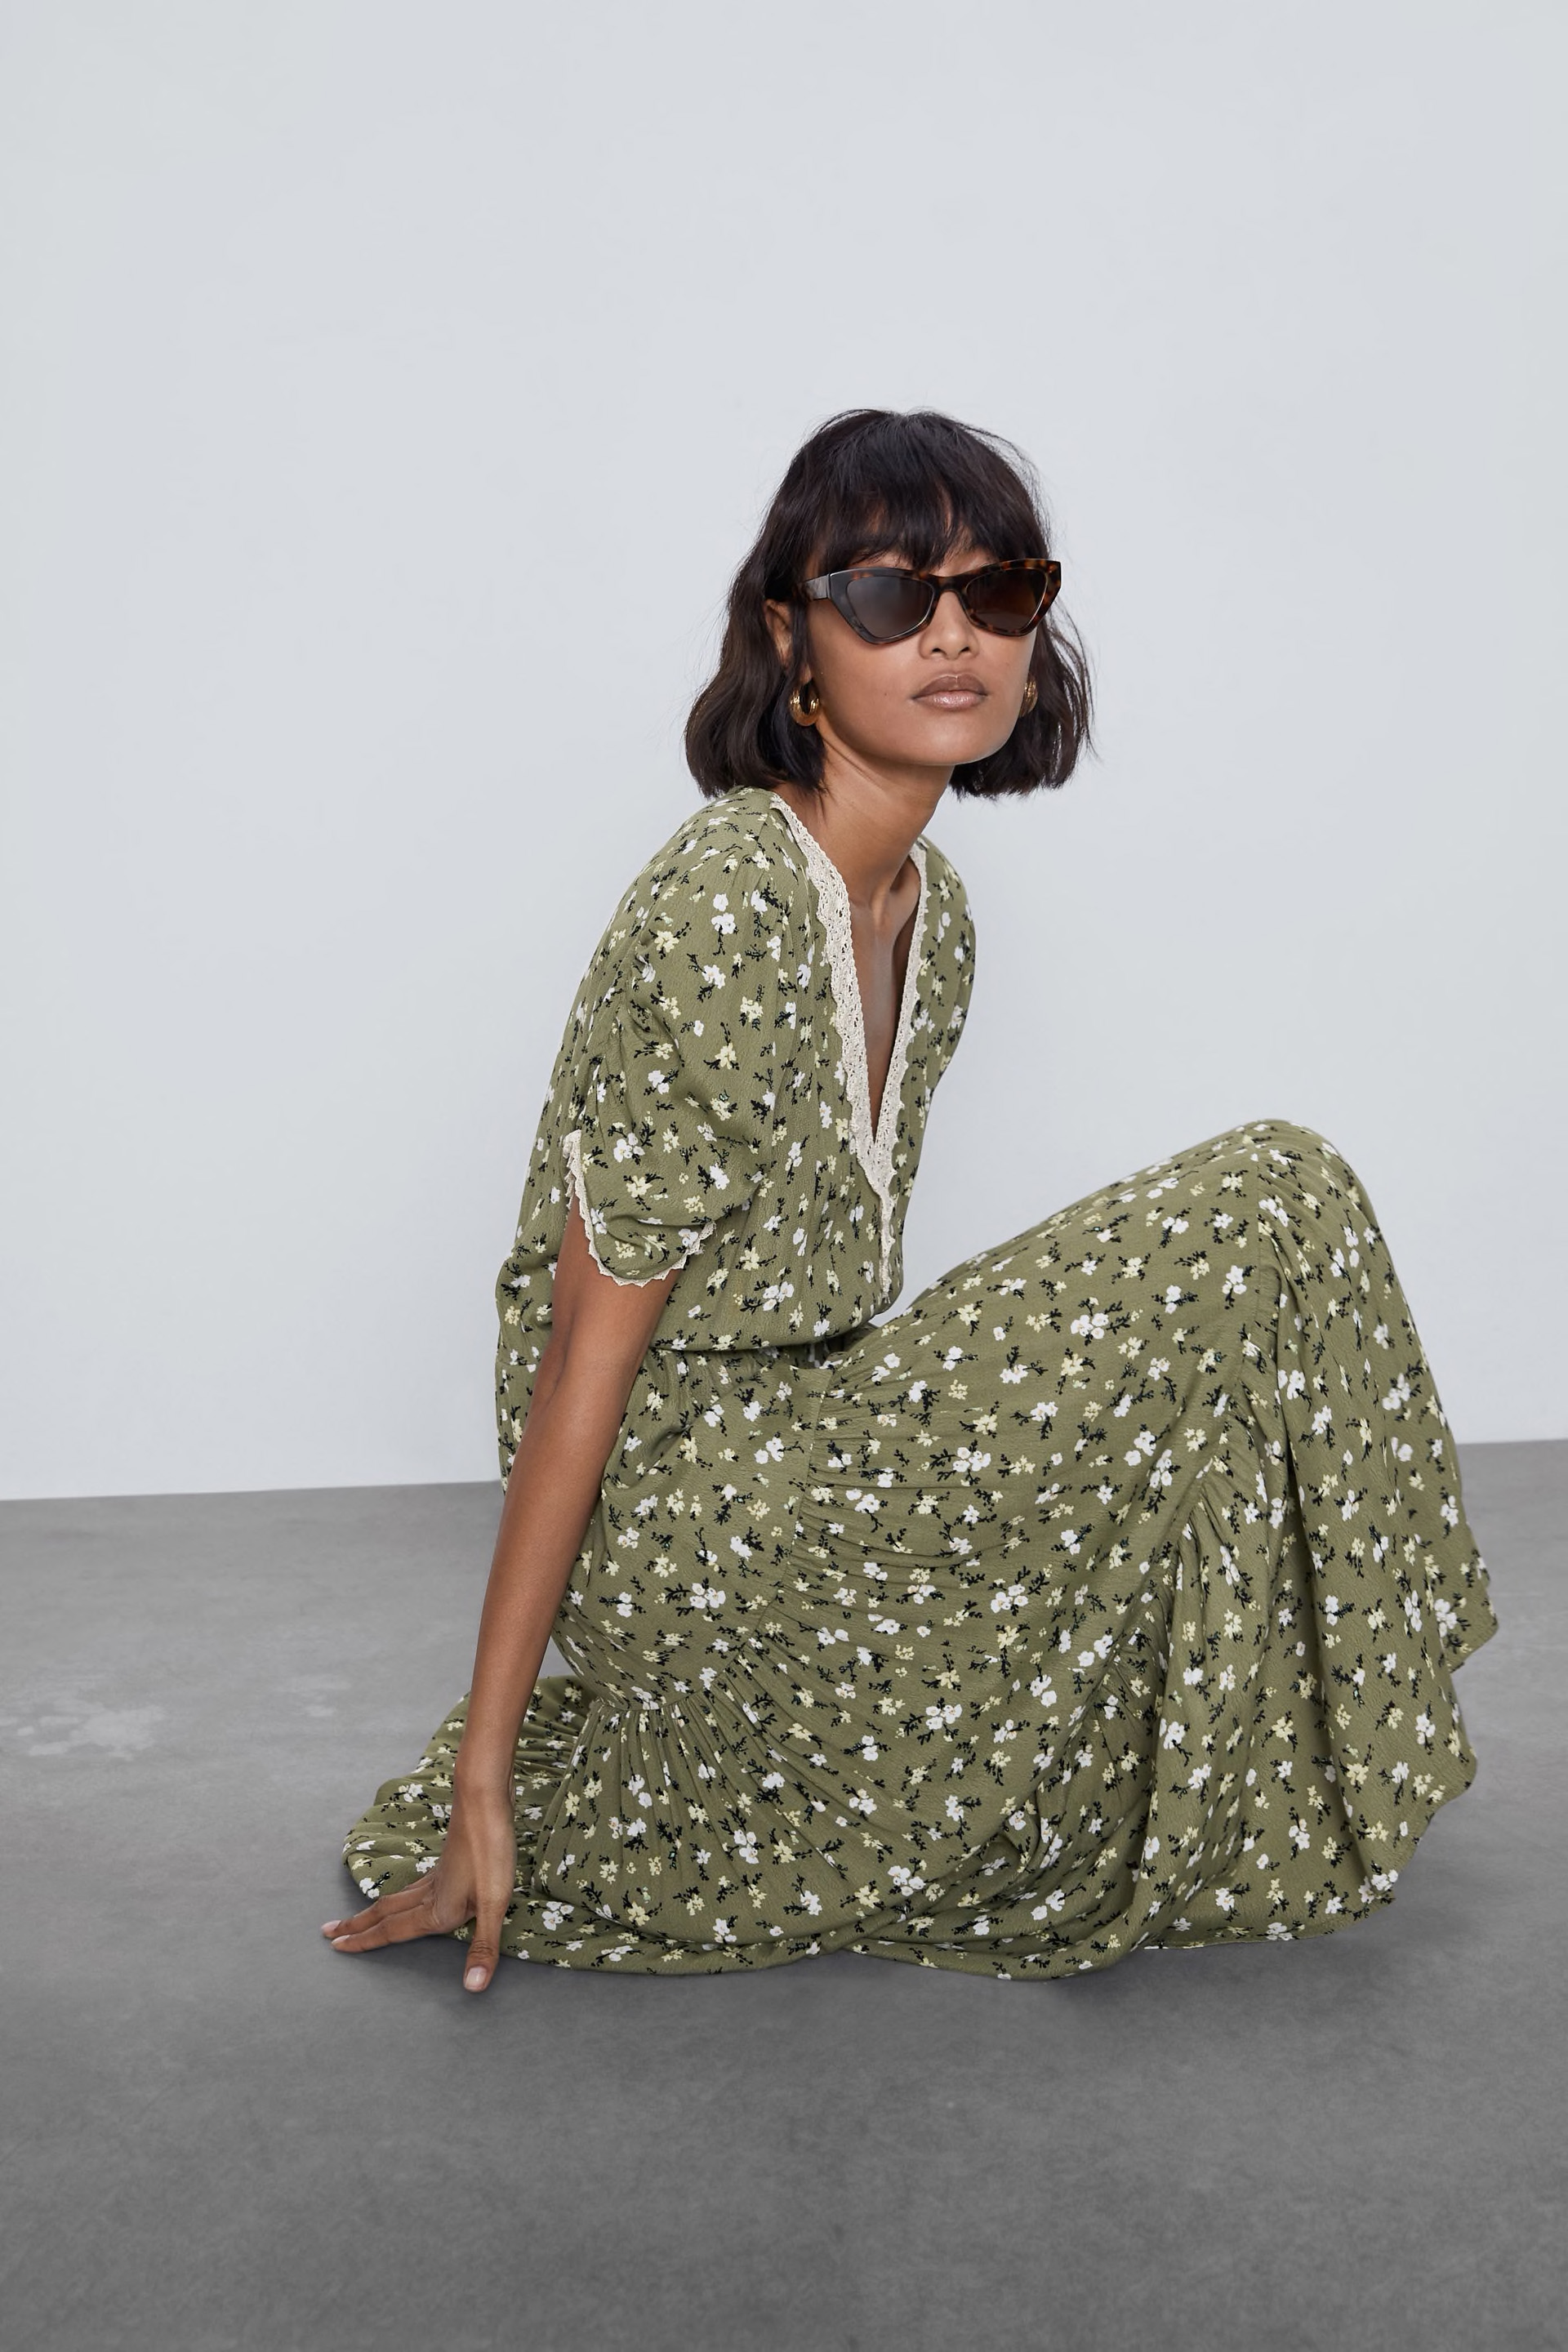 Pieces to Buy From Zara's Summer Sale 